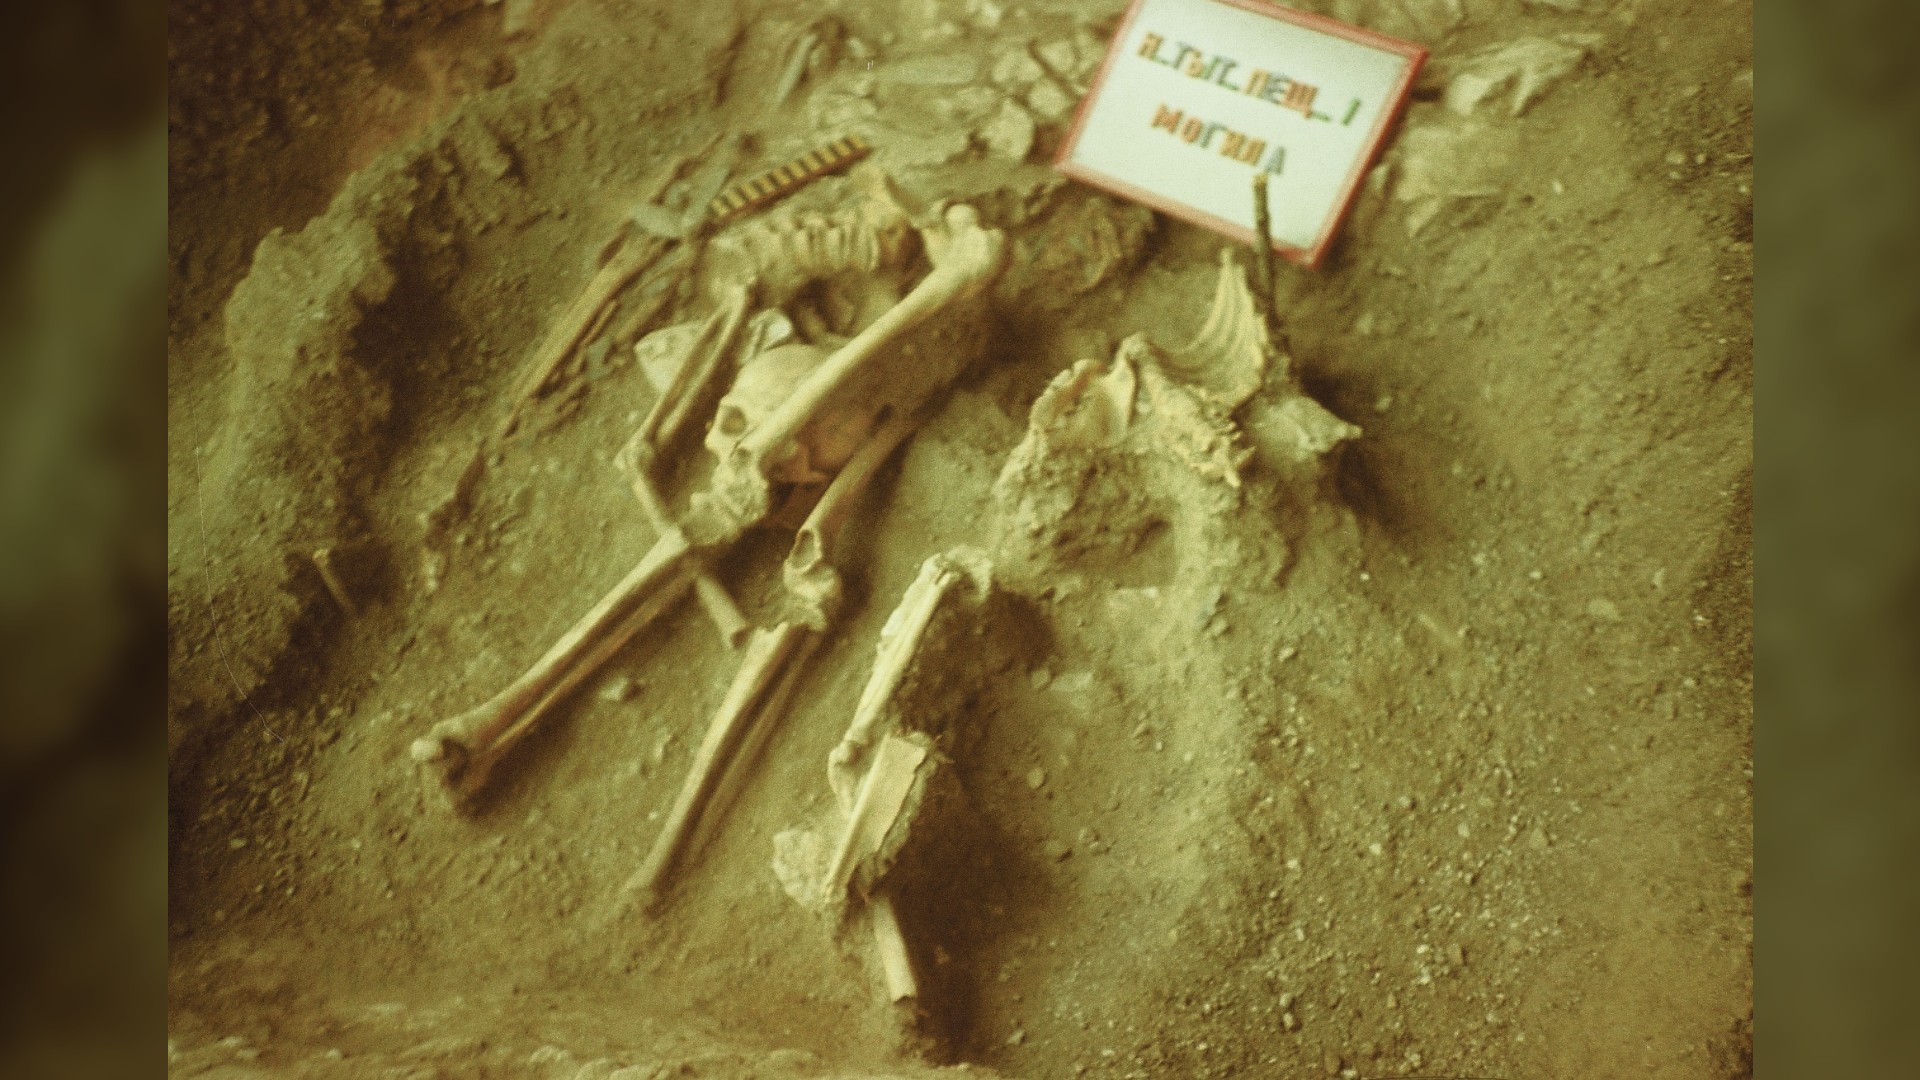 Human remains were found in the grave.